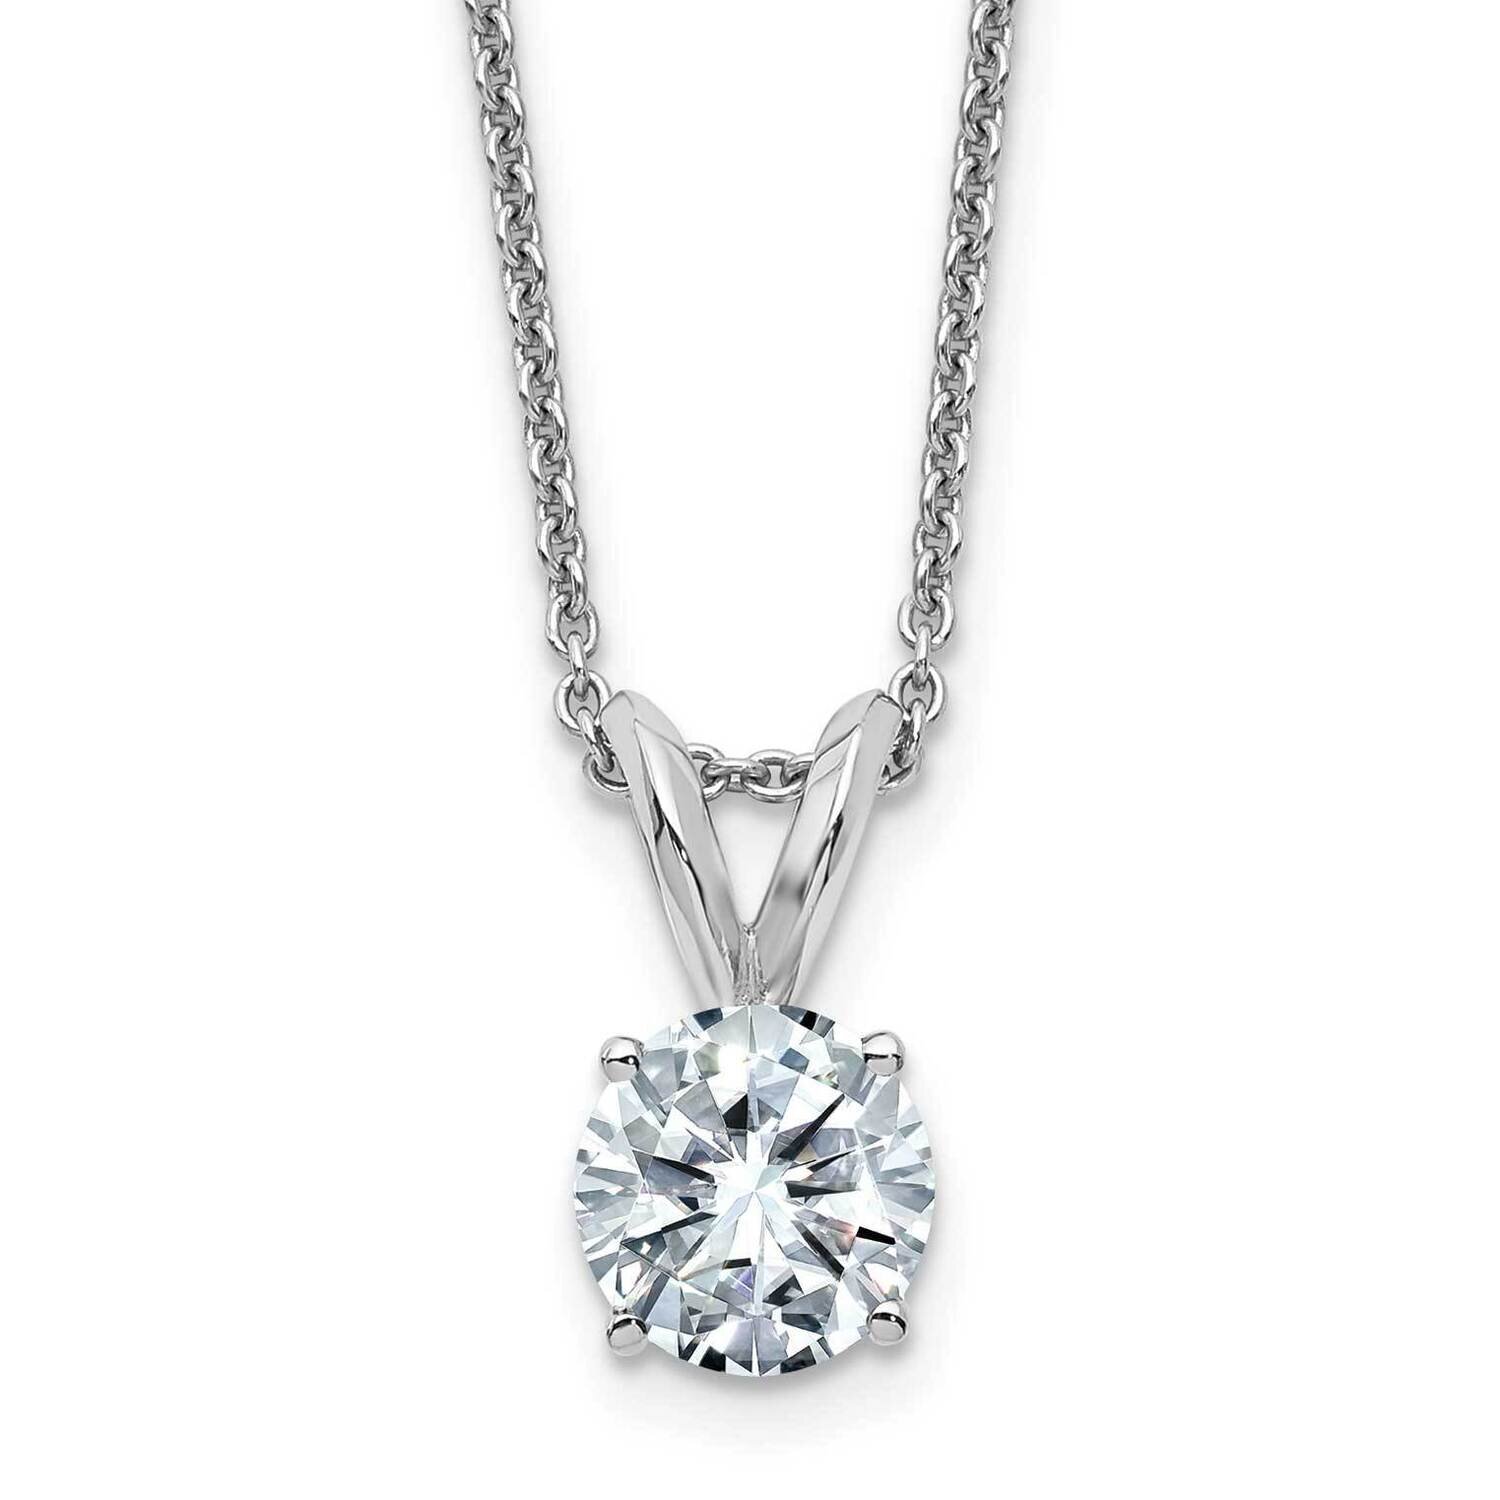 1ct. 6.5mm Round D E F Pure Light Moissanite Solitaire Necklace 14k White Gold WG936-9MP